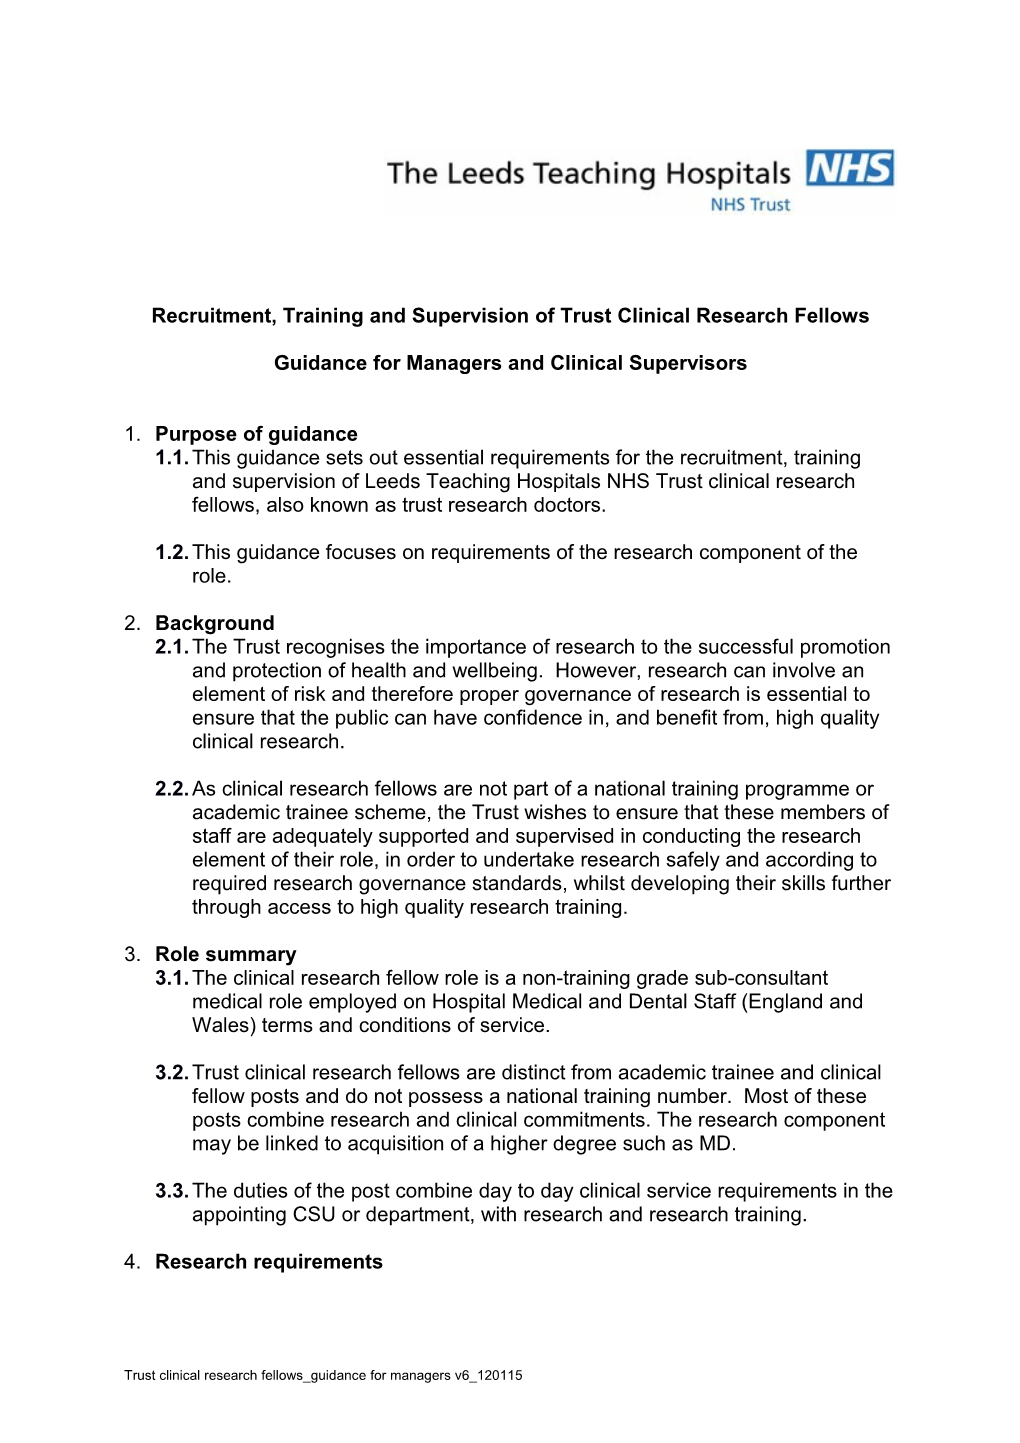 Recruitment, Training and Supervision of Trust Clinical Research Fellows